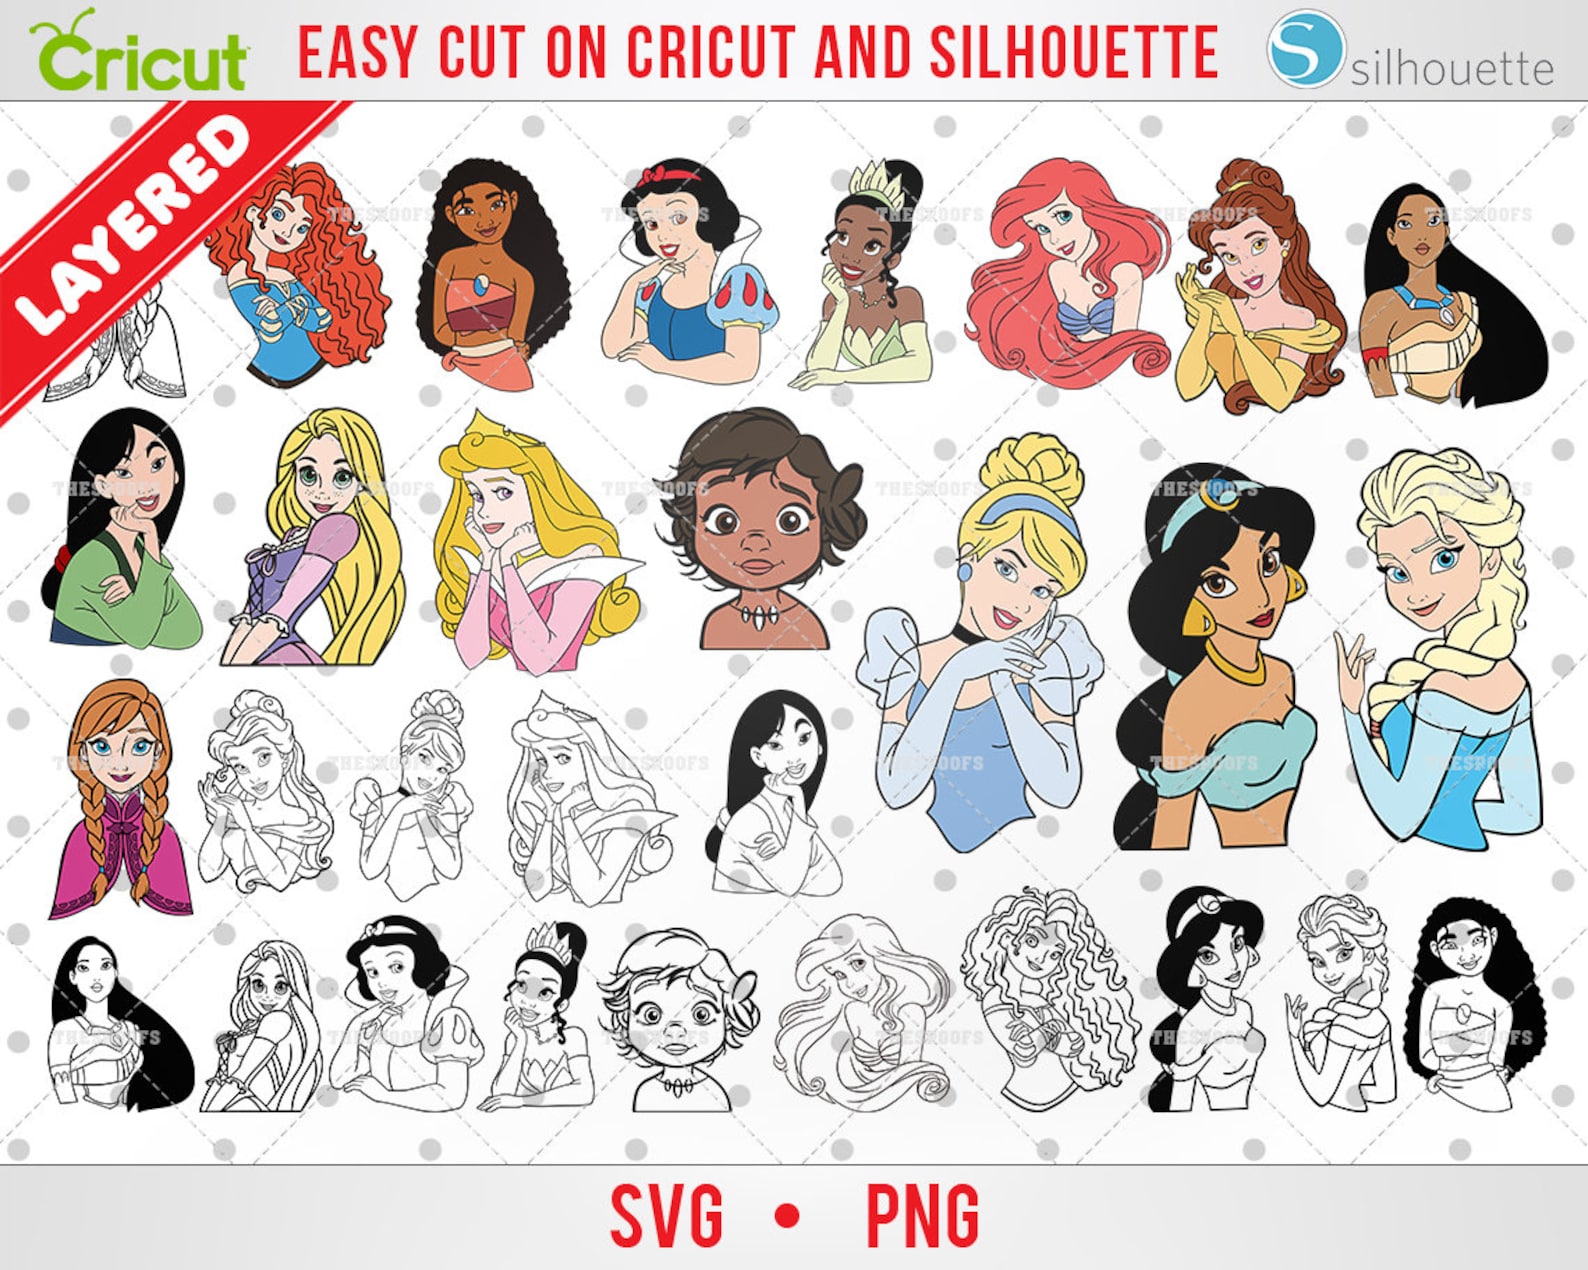 Bundle Layered SVG Cut Files for Cricut and Silhouette Ready - Etsy